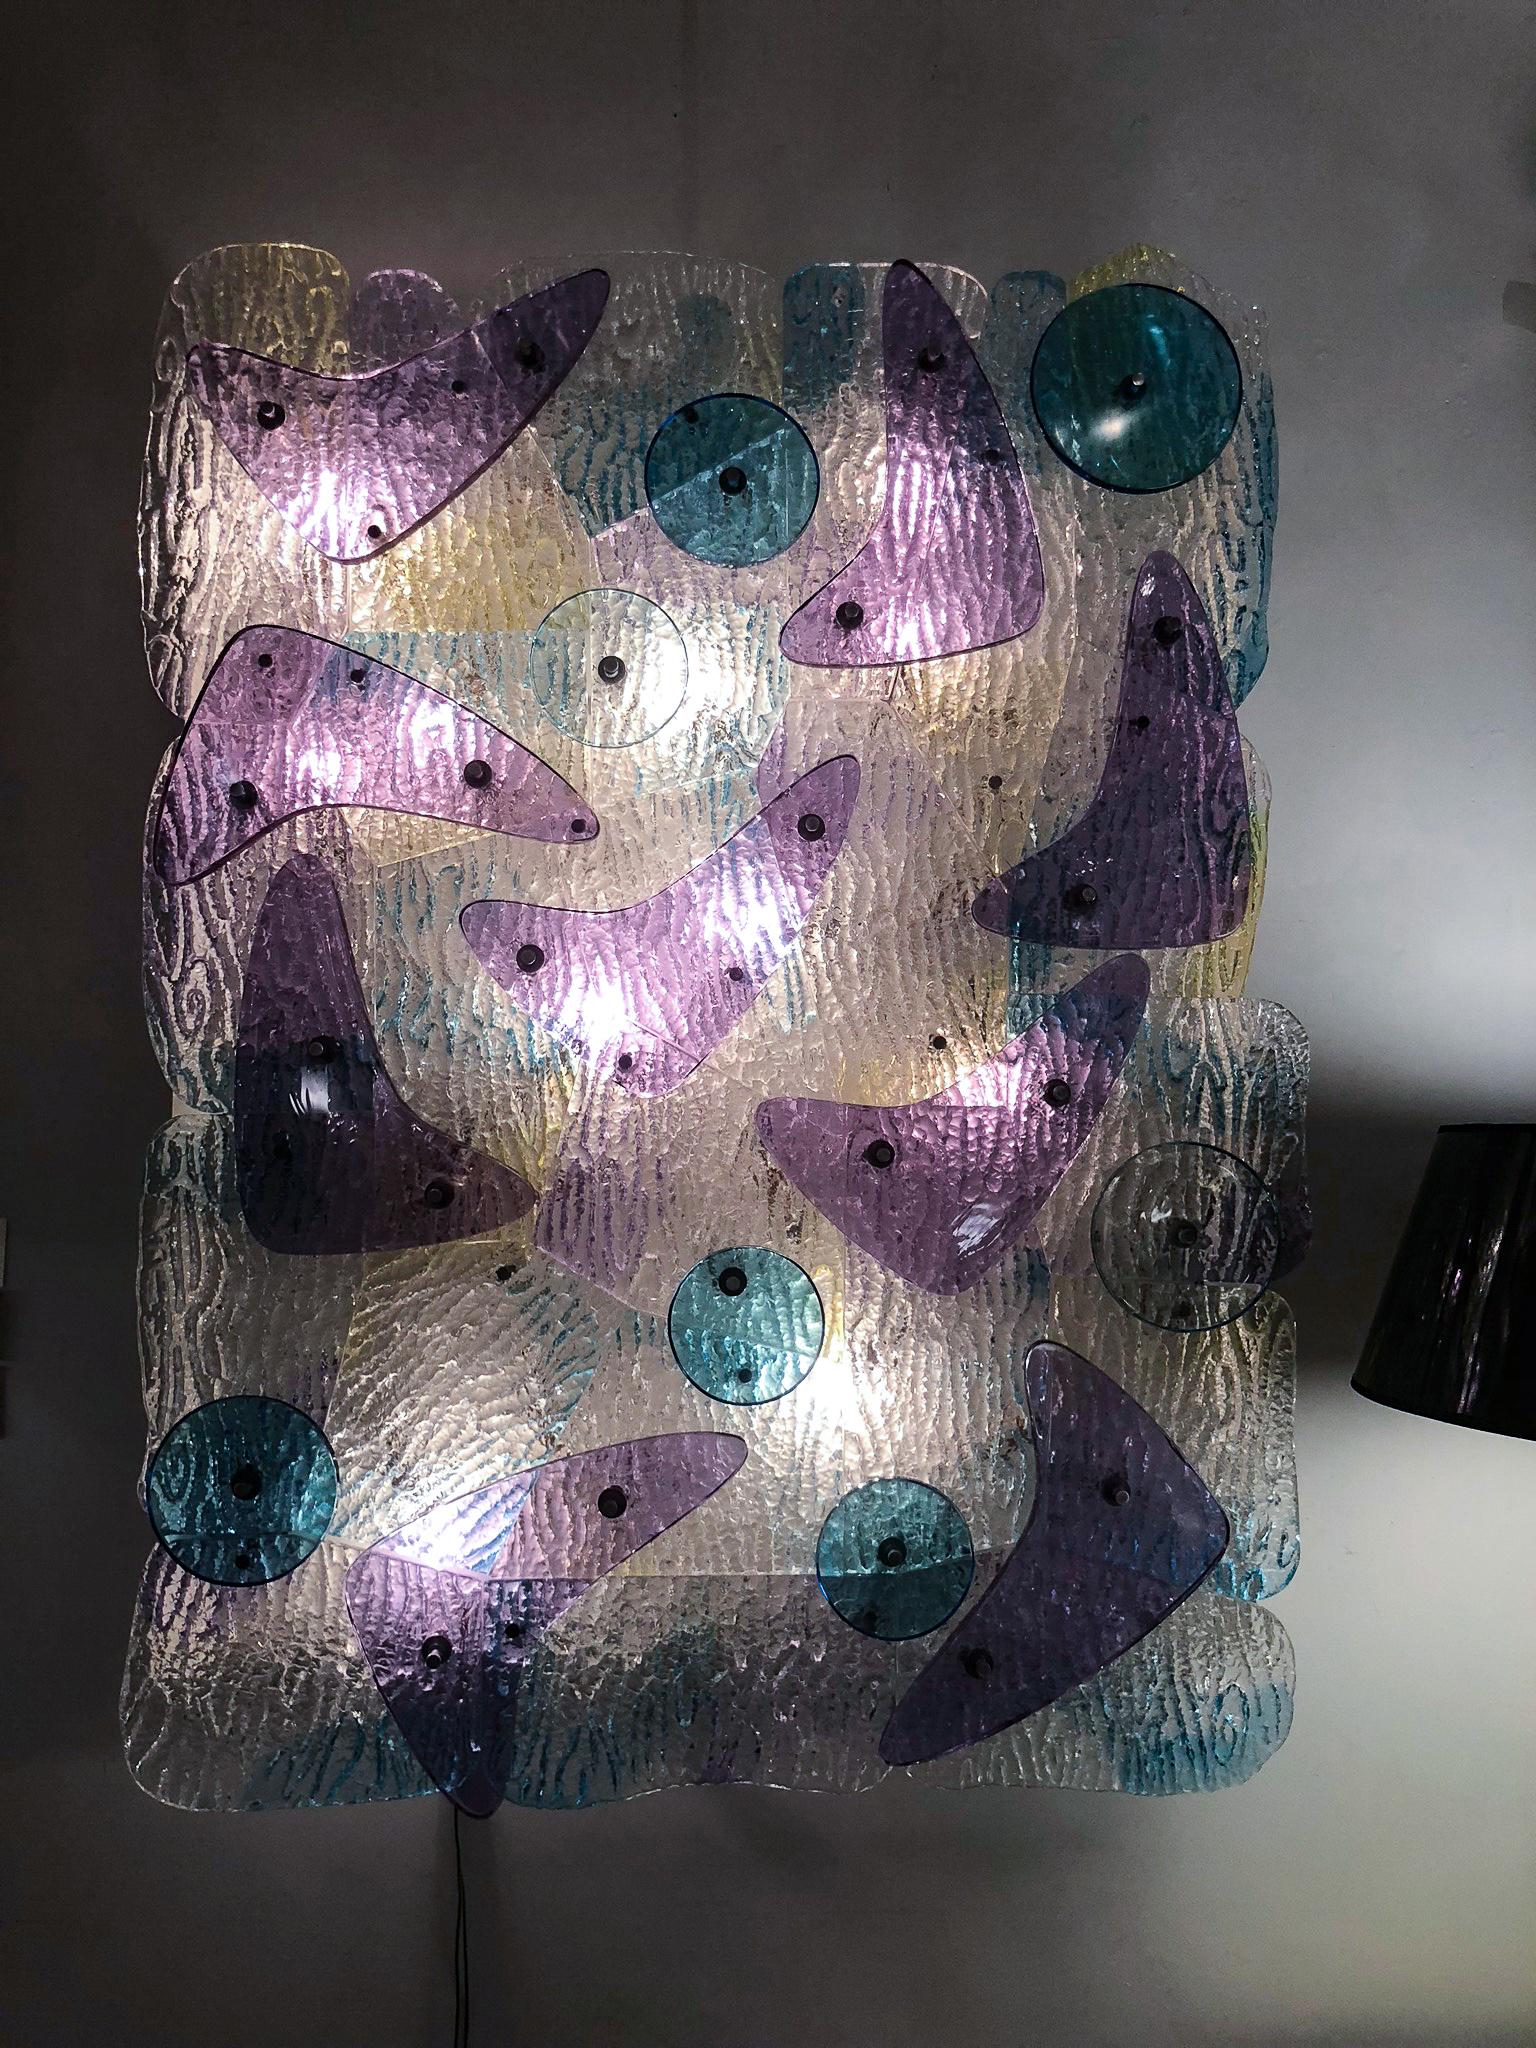 Interlocking glass segments with vivid yellow-green and transparent blue patches beneath large violet glass “boomerangs” and cyan blue discs. Signed on the glass “Archimede Seguso, Murano 1973.” Non-UL electrified.
